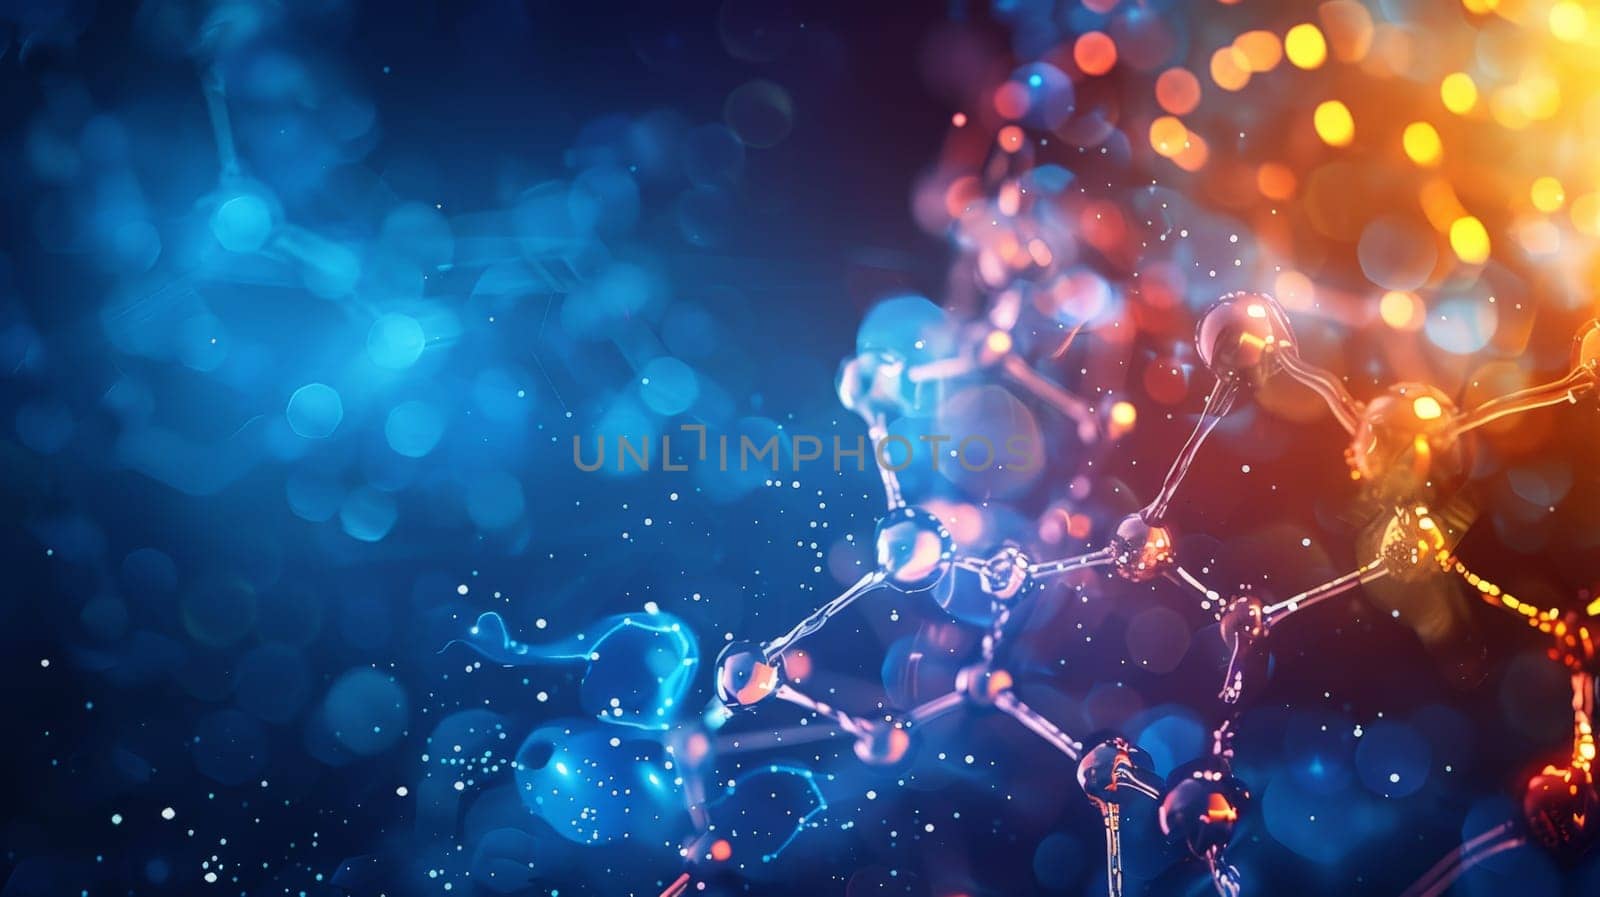 A blue and orange background with a molecular structure in the center.